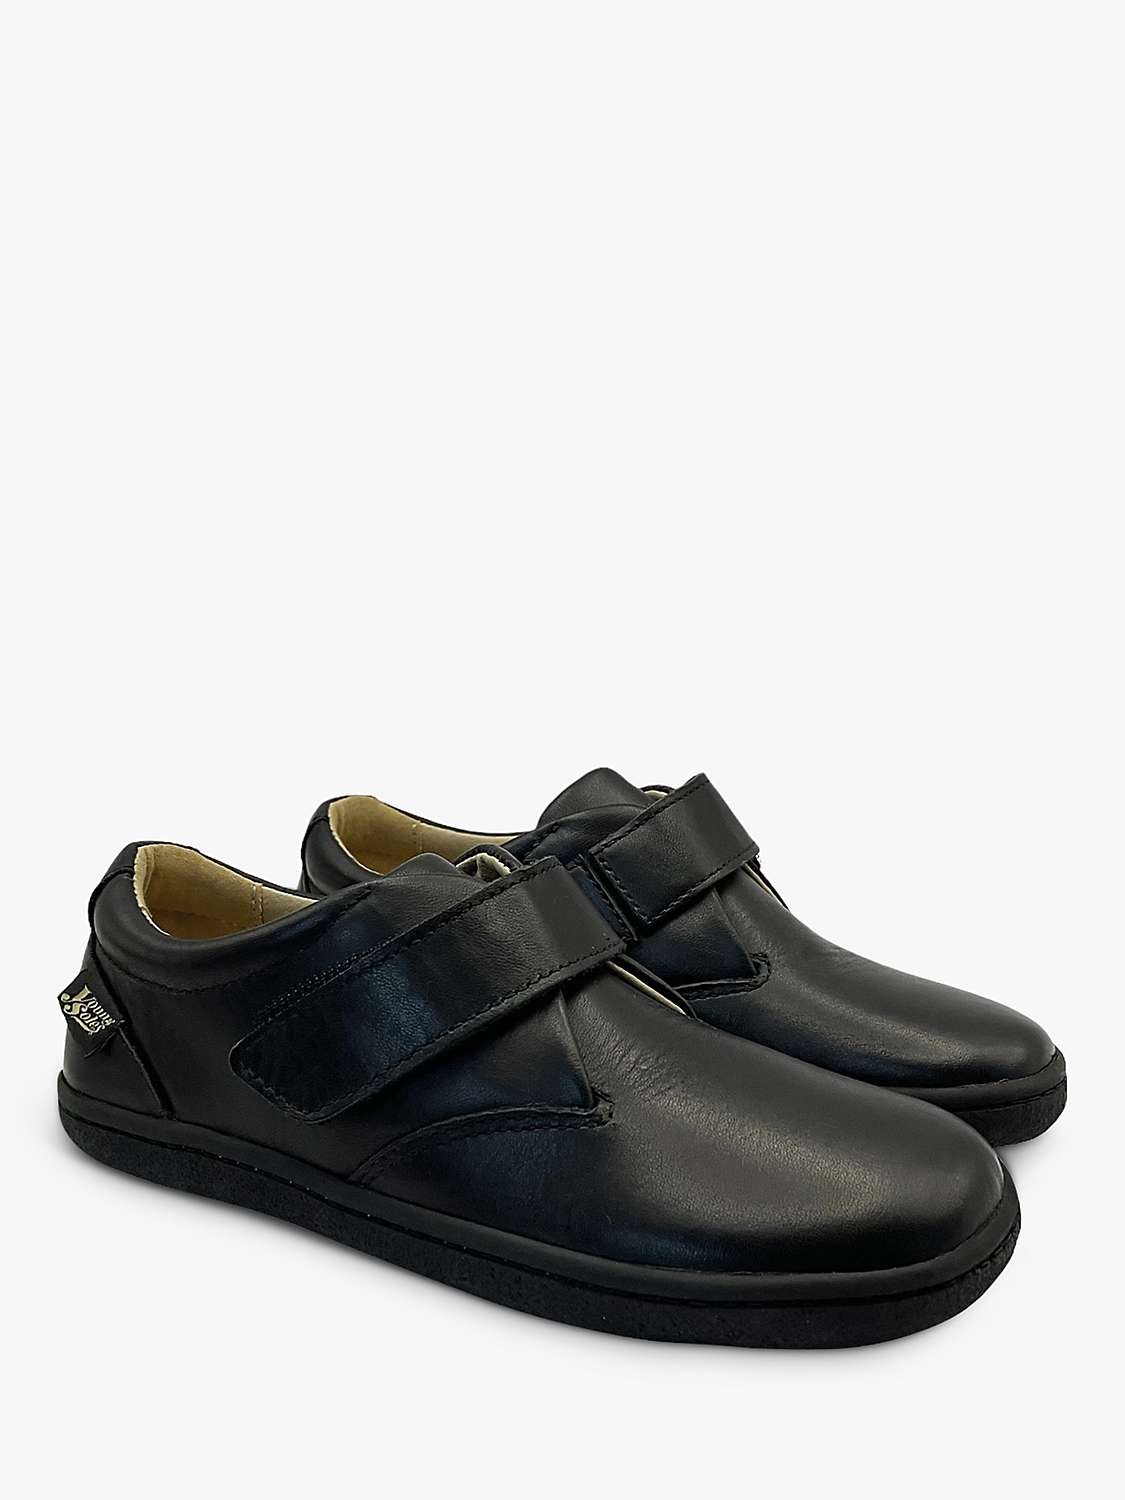 Buy Young Soles Kids' Leather Oliver Shoes, Black Online at johnlewis.com